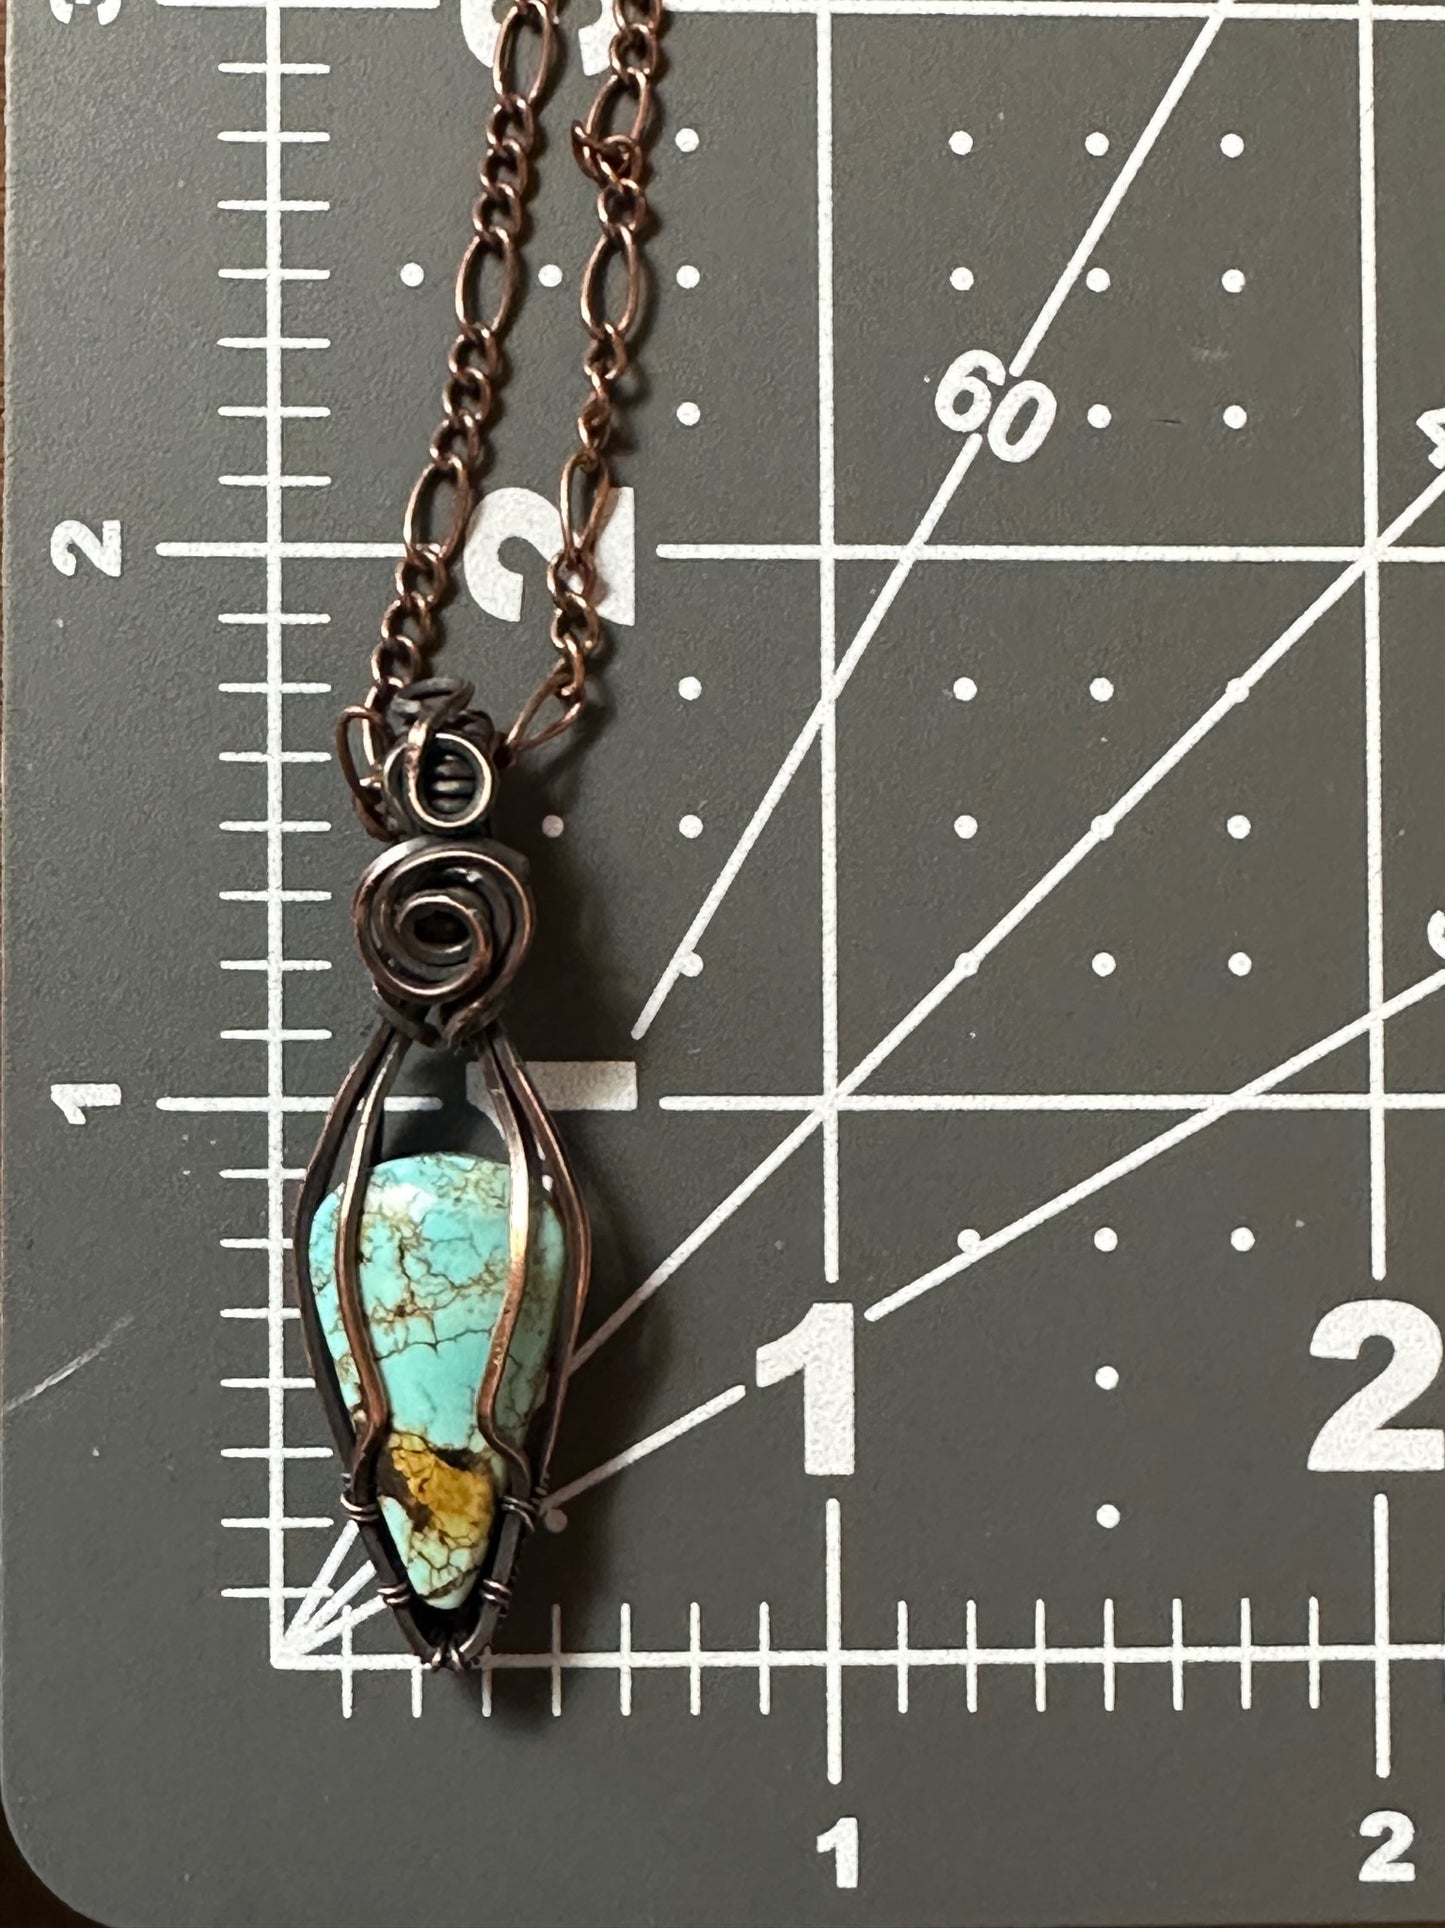 Handmade Turquoise Teardrop Wire Wrapped and Woven Pendant